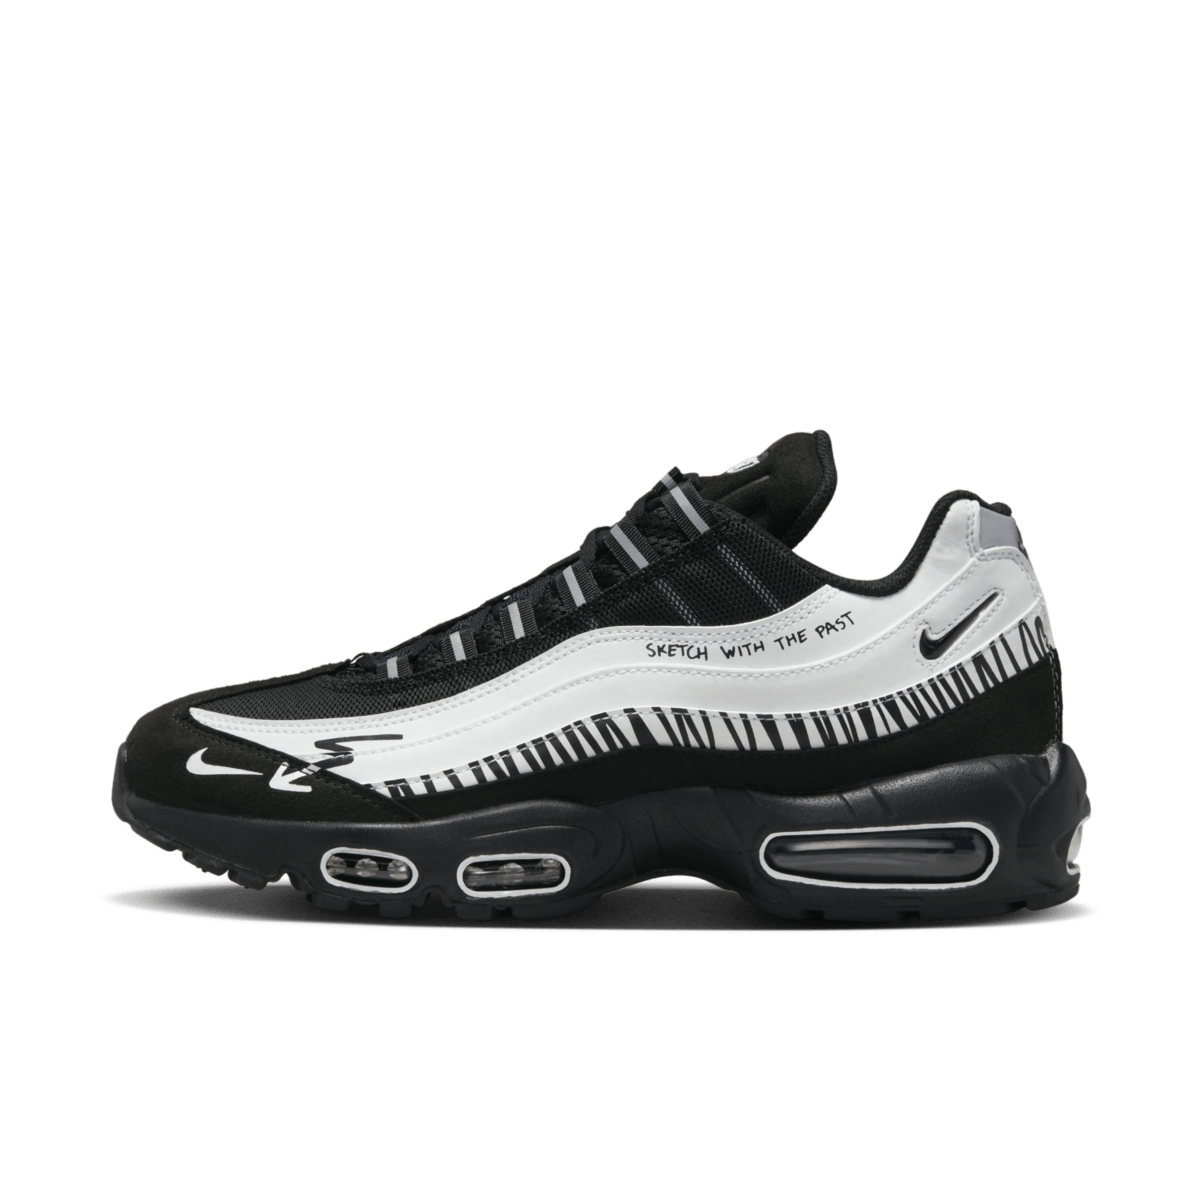 Nike Air Max 95 X 'Make Your Mark' DX4615-100